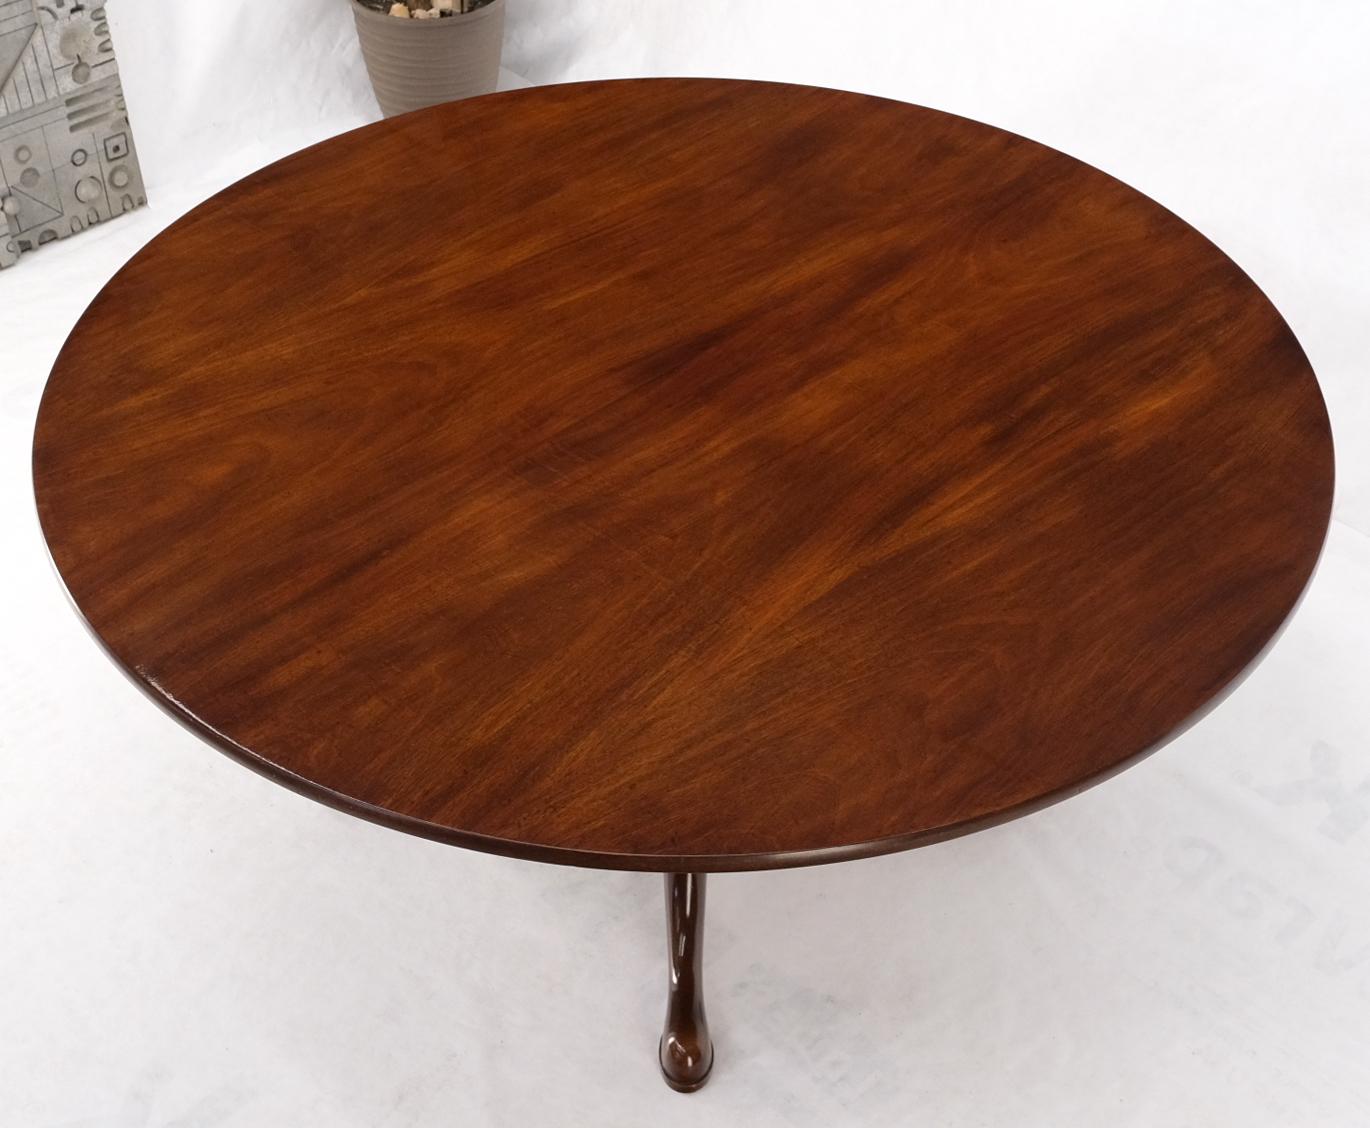 Lacquered Large Round Solid Mahogany Dining Breakfast Table Removable Top